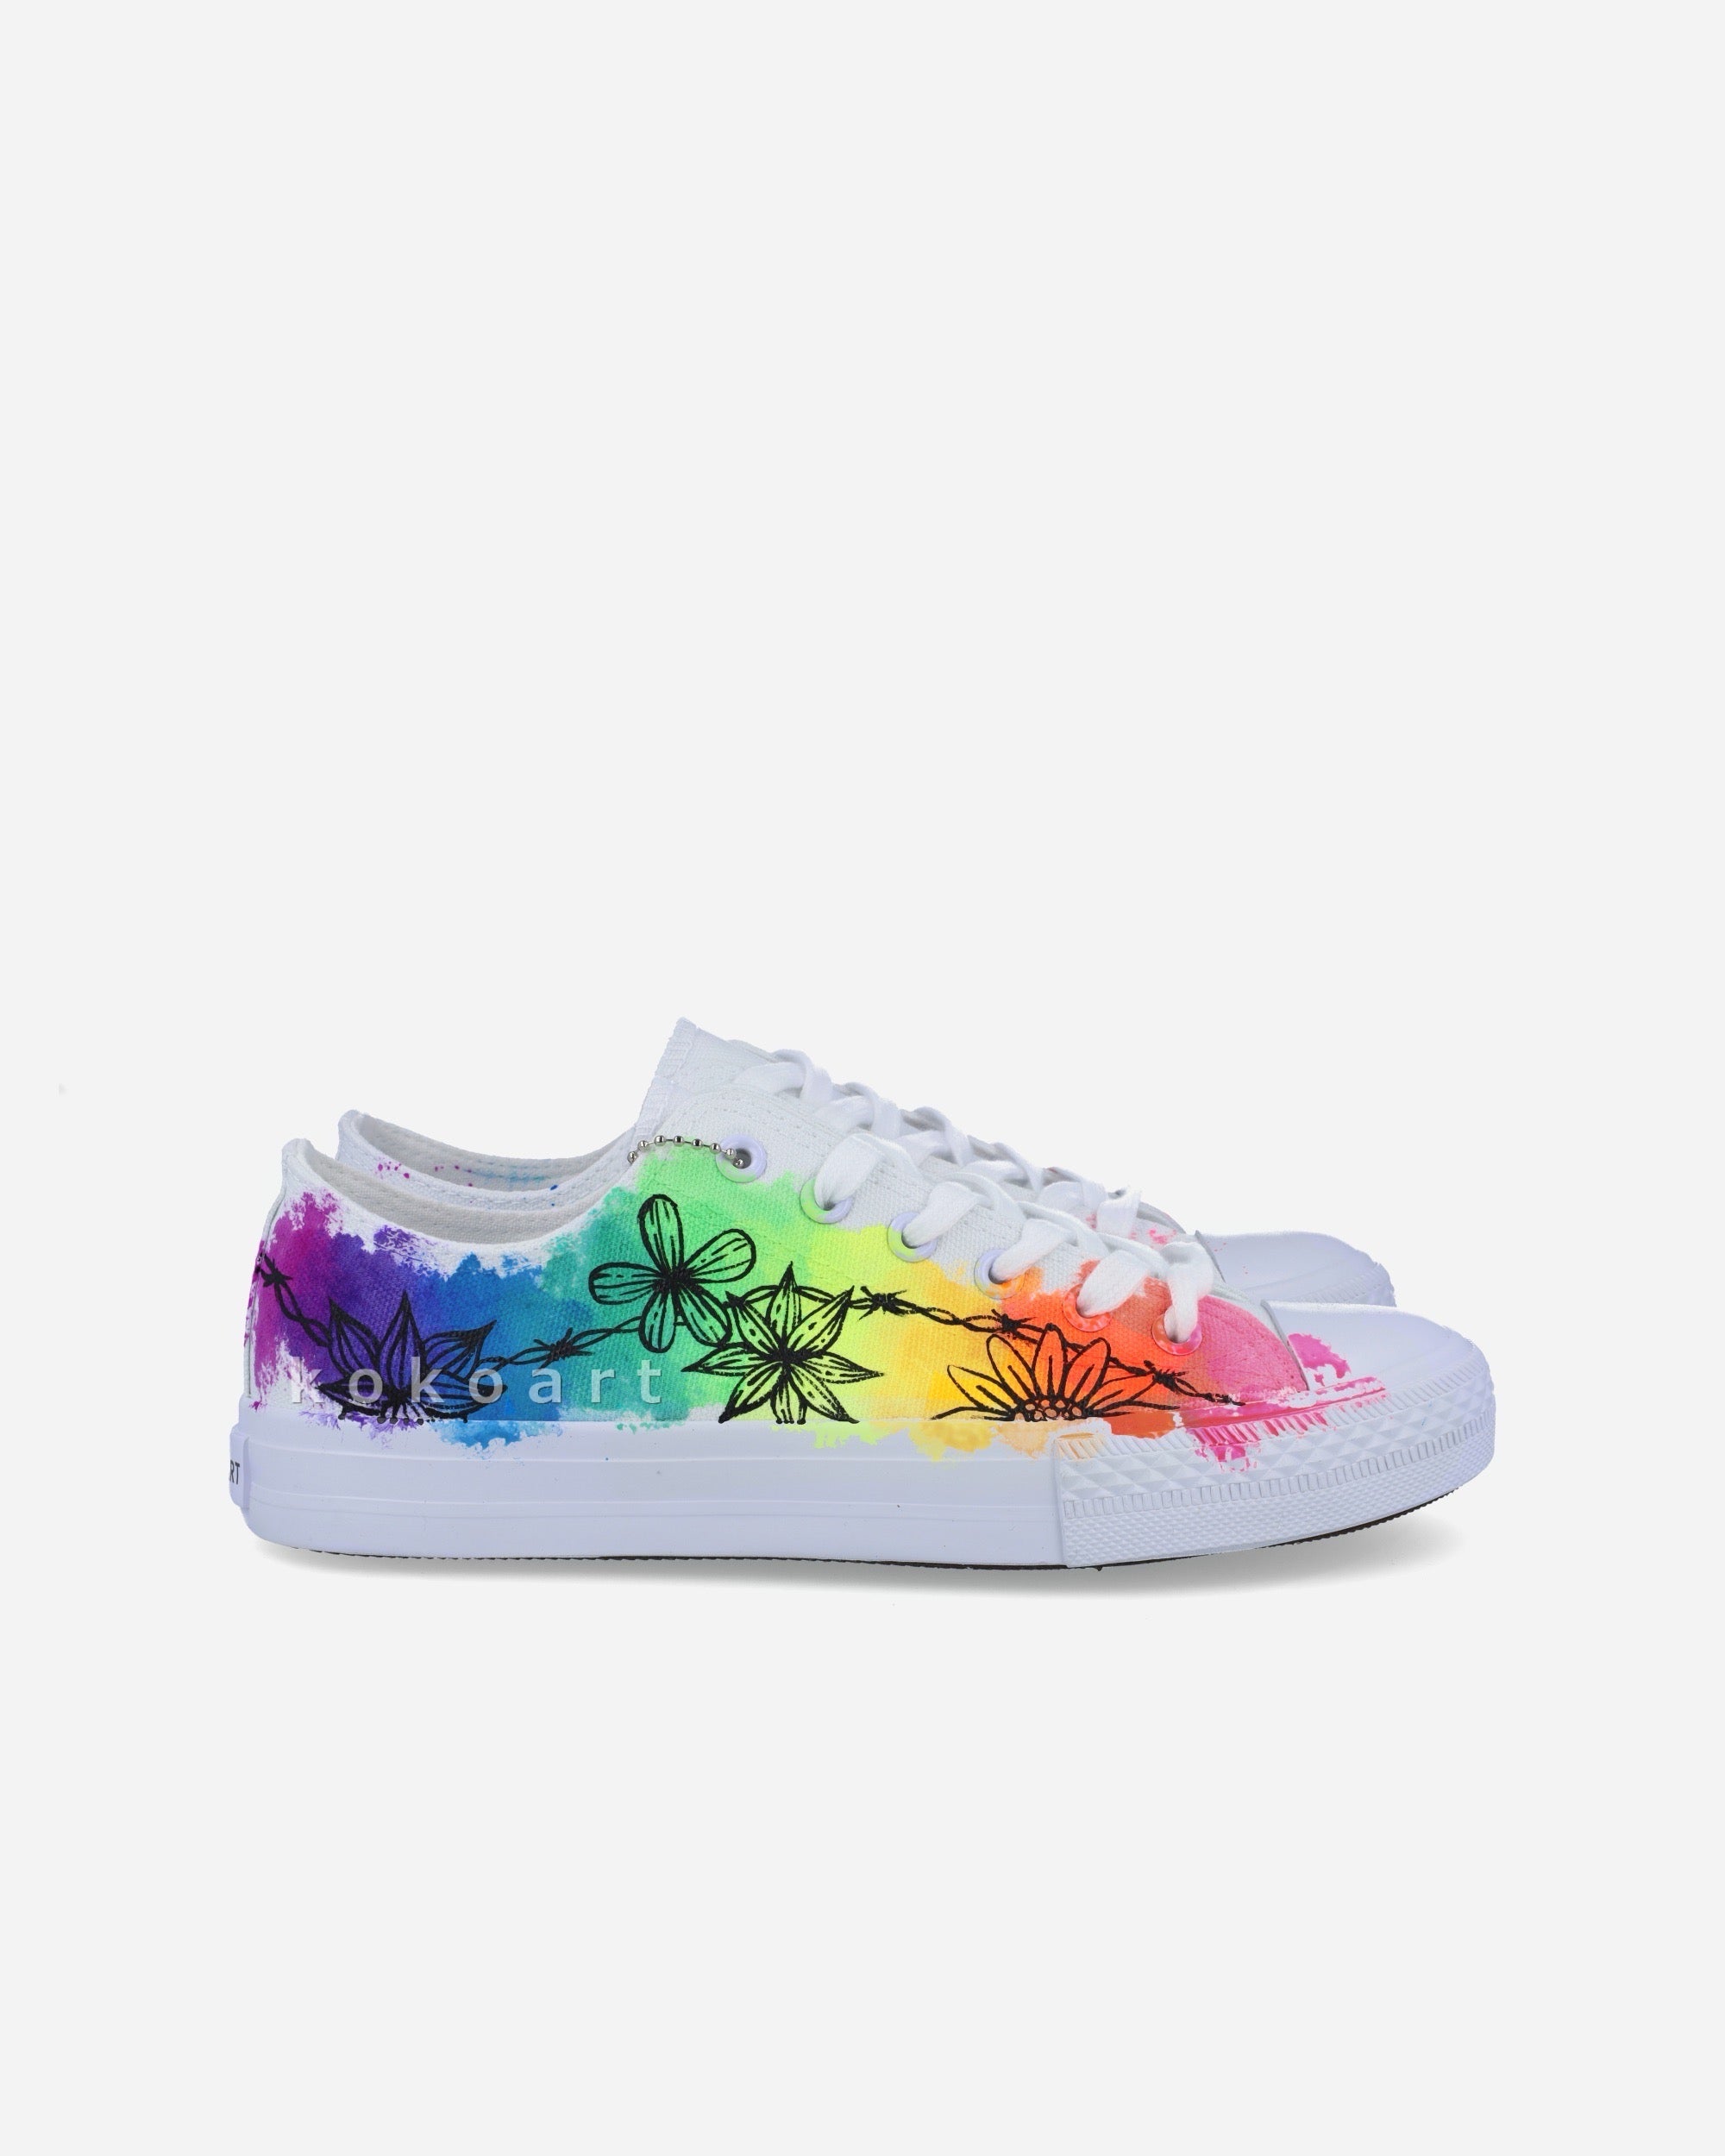 Neon Splatters Flowers Hand Painted Shoes